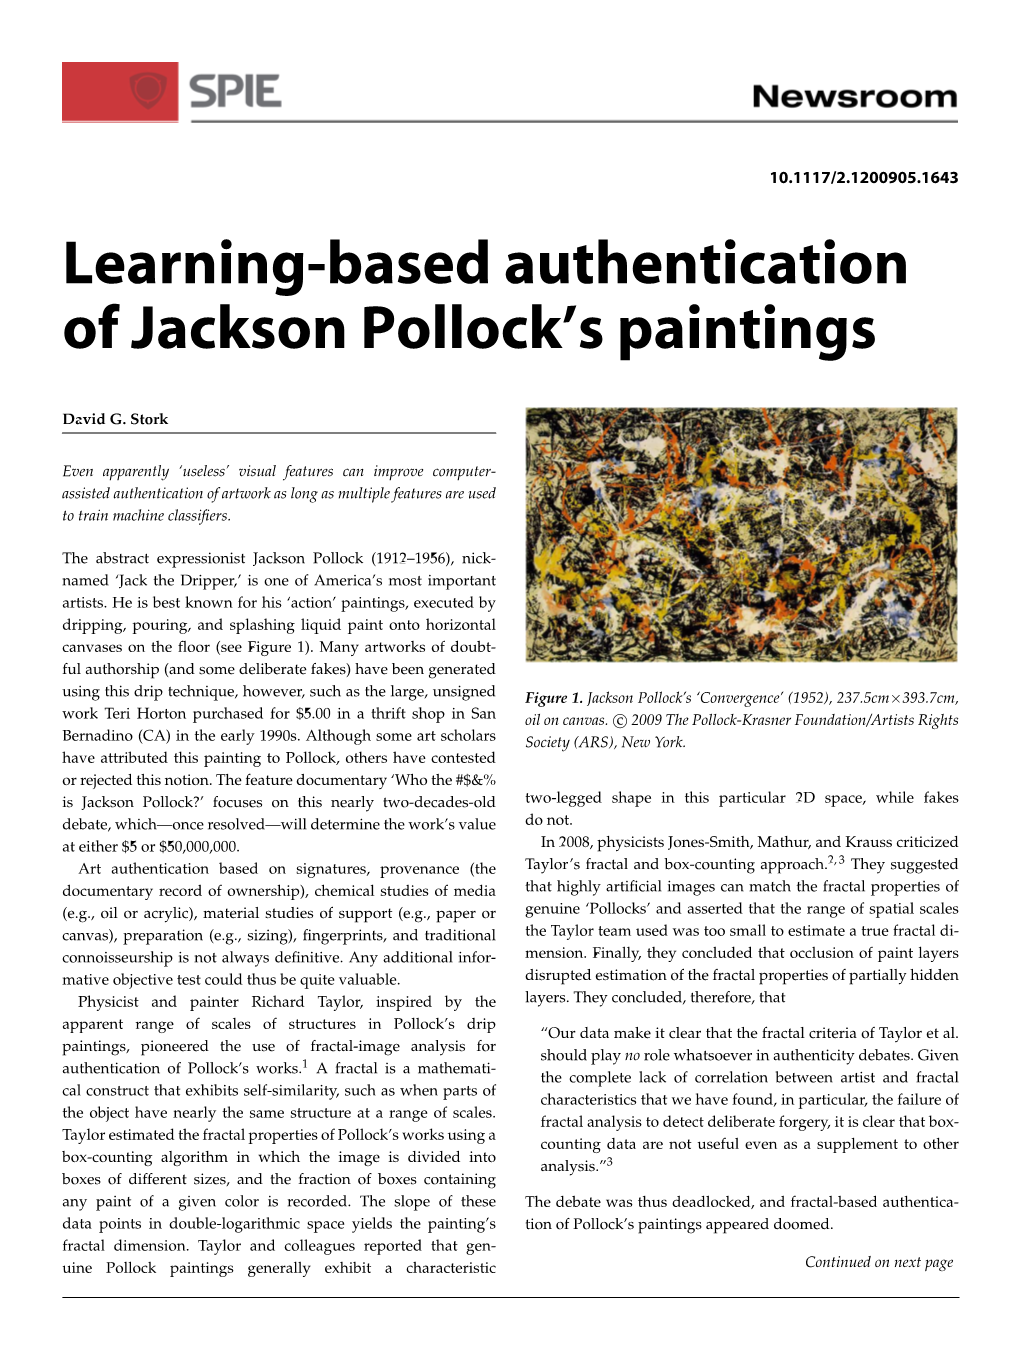 Learning-Based Authentication of Jackson Pollock's Paintings